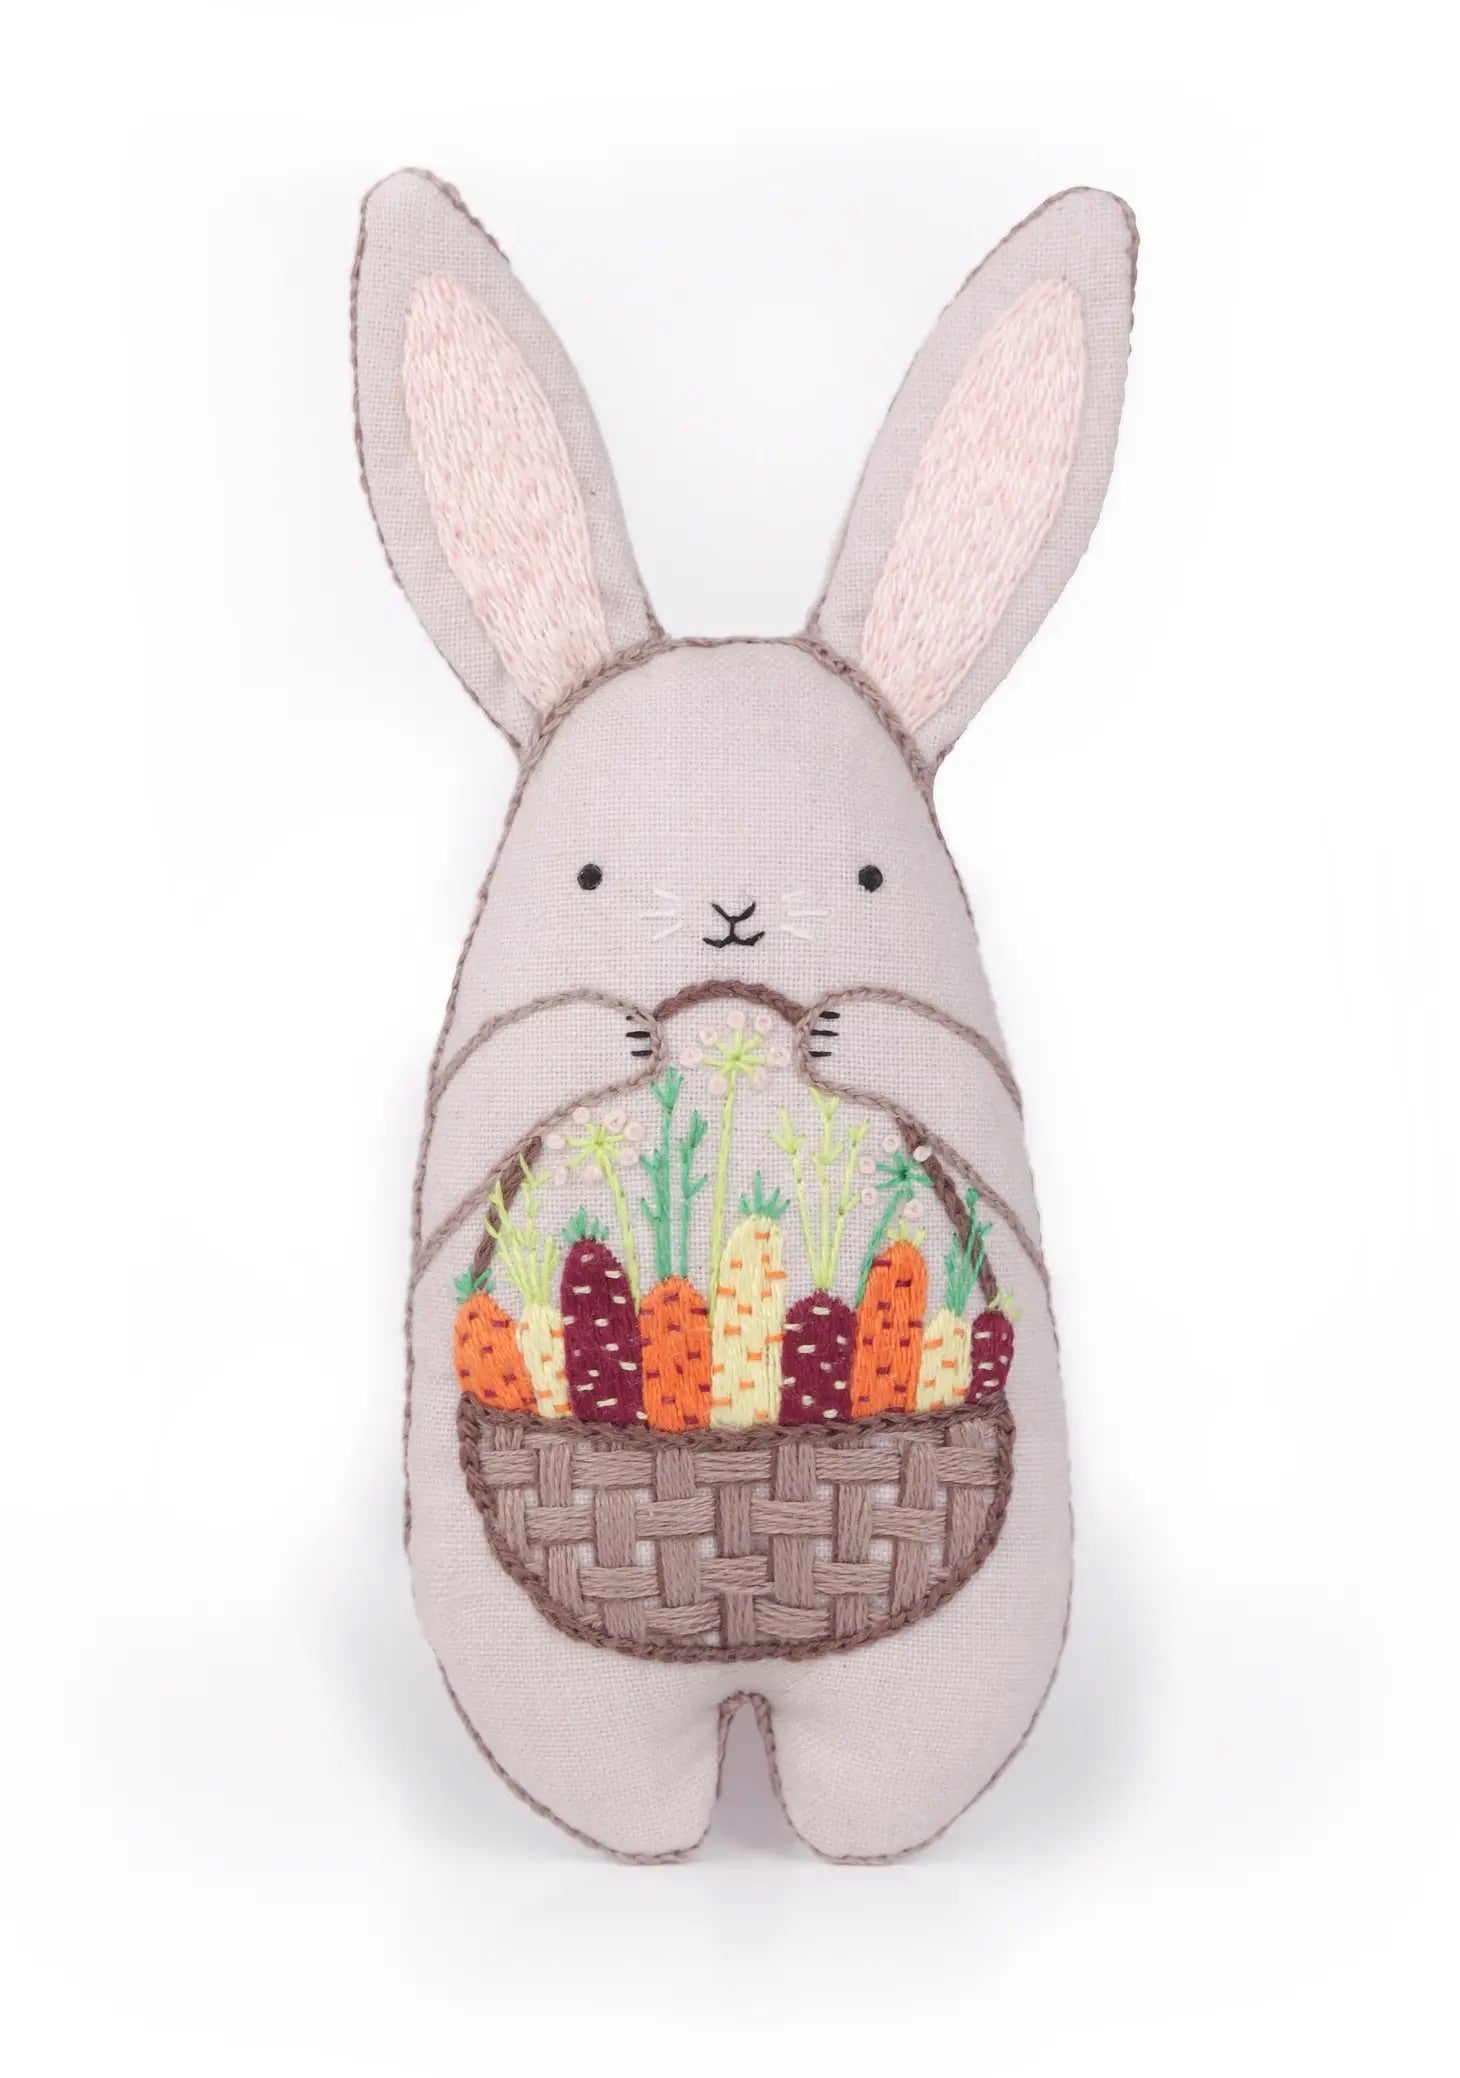 Bunny Embroidered Doll Kit